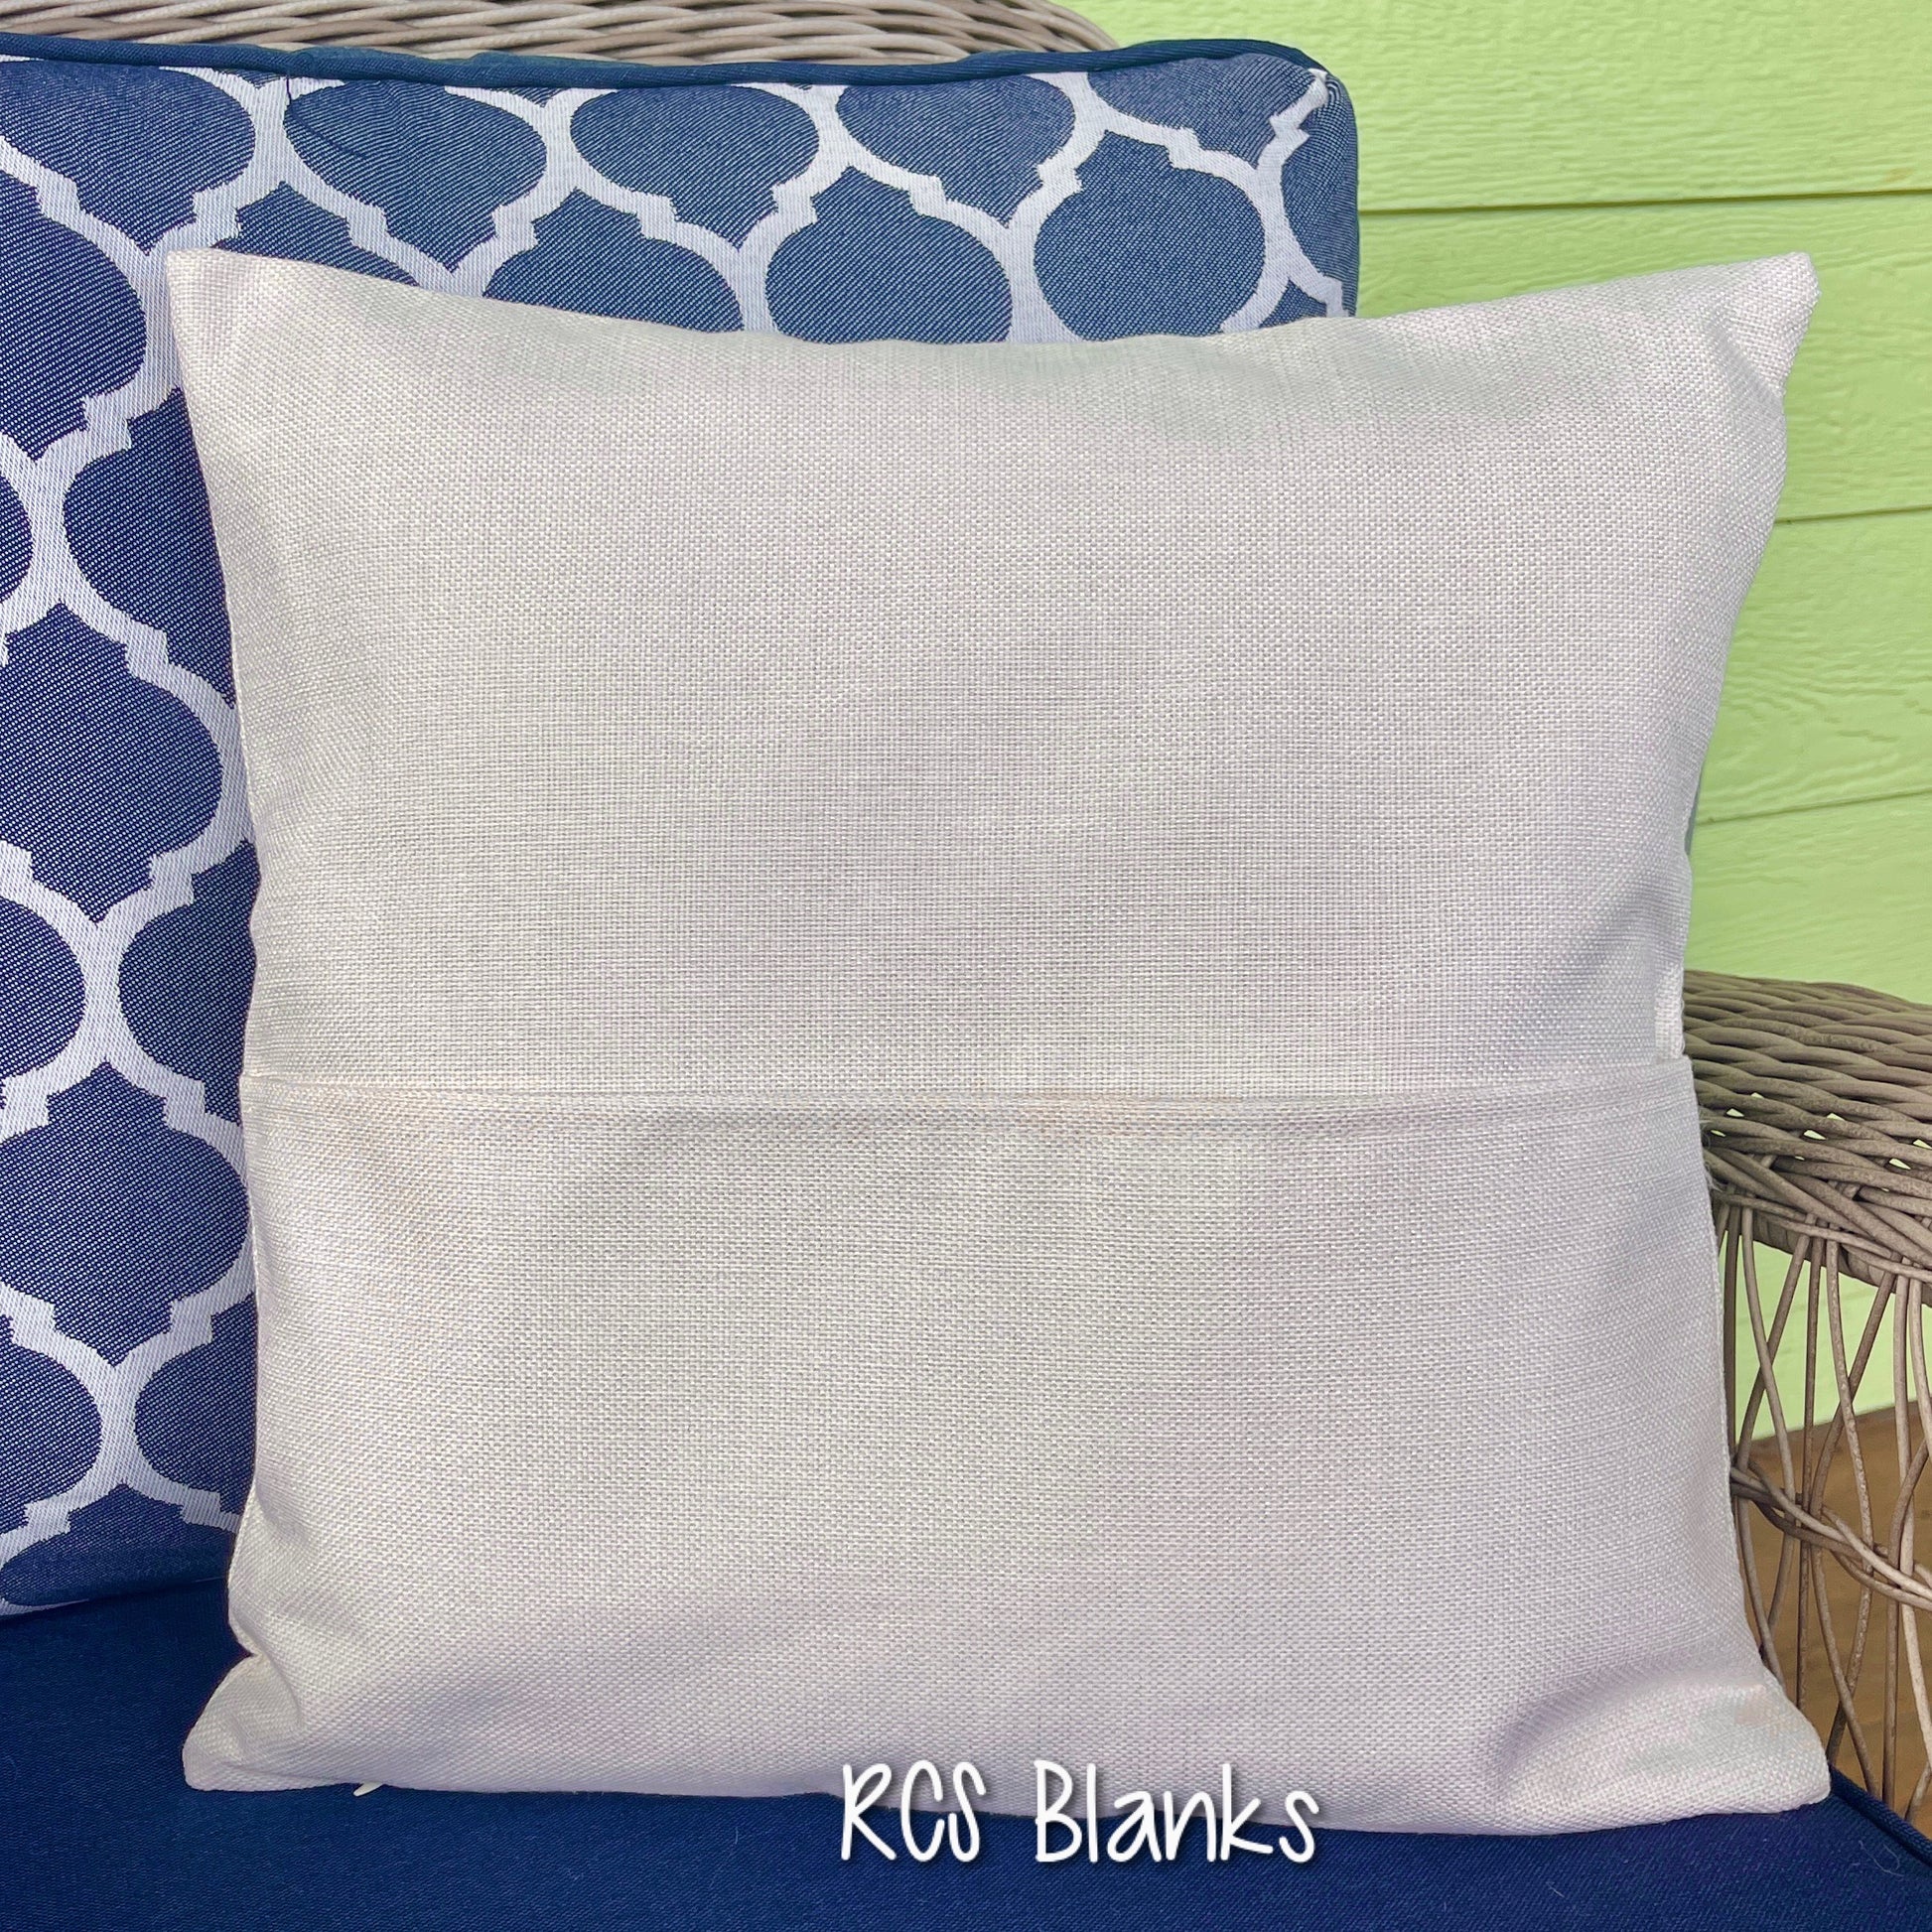 How To SUBLIMATE ON A Pillow Cover 